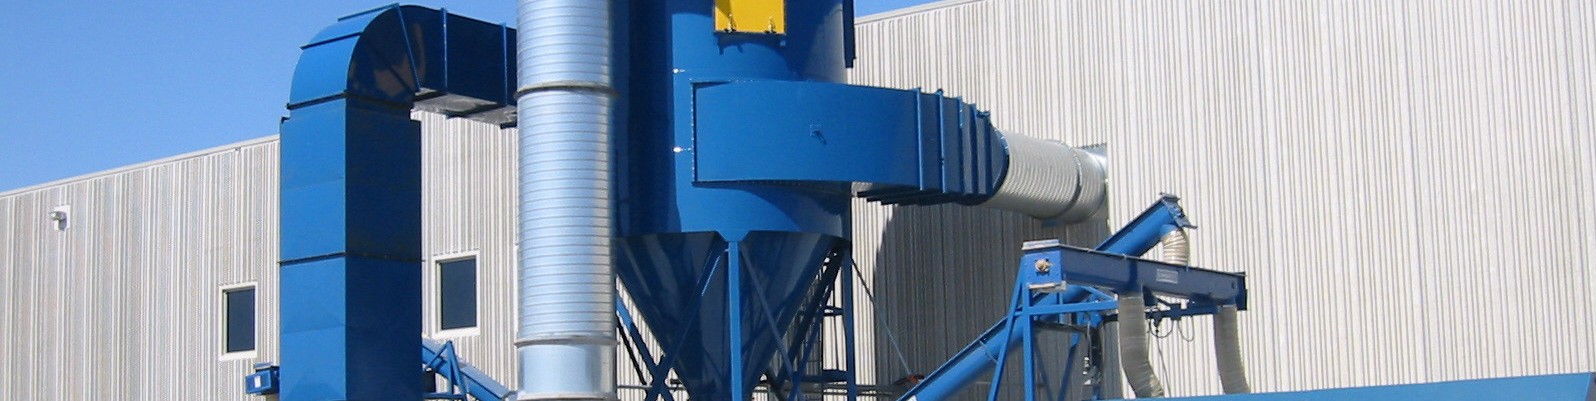 Donaldson Baghouse Dust Collectors | AIRPLUS Industrial